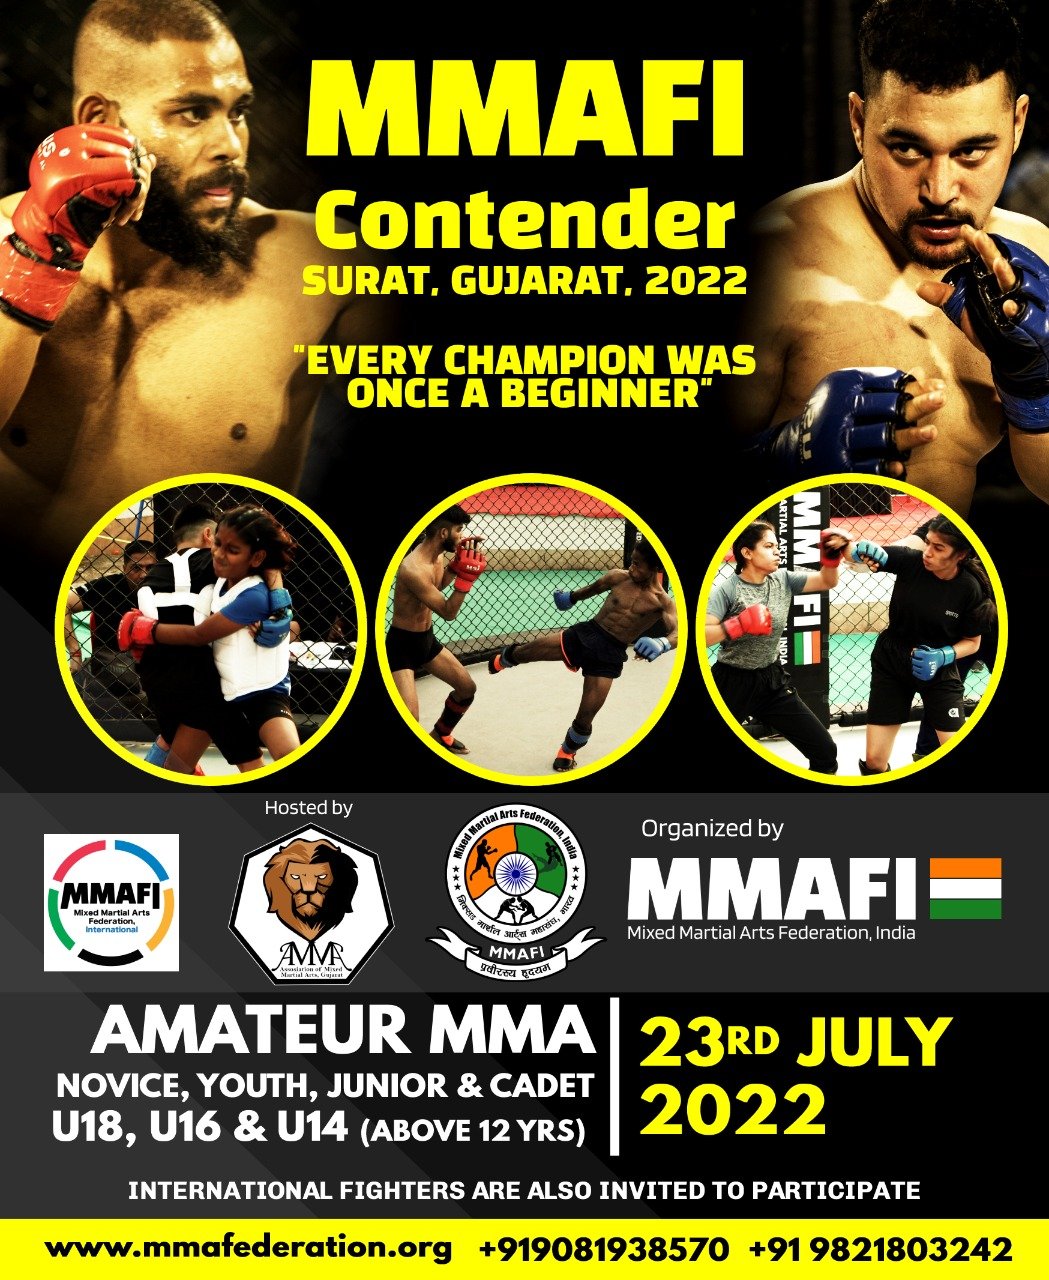 You are currently viewing Athlete Registration Form for MMAFI Contender 2022, Surat, Gujarat